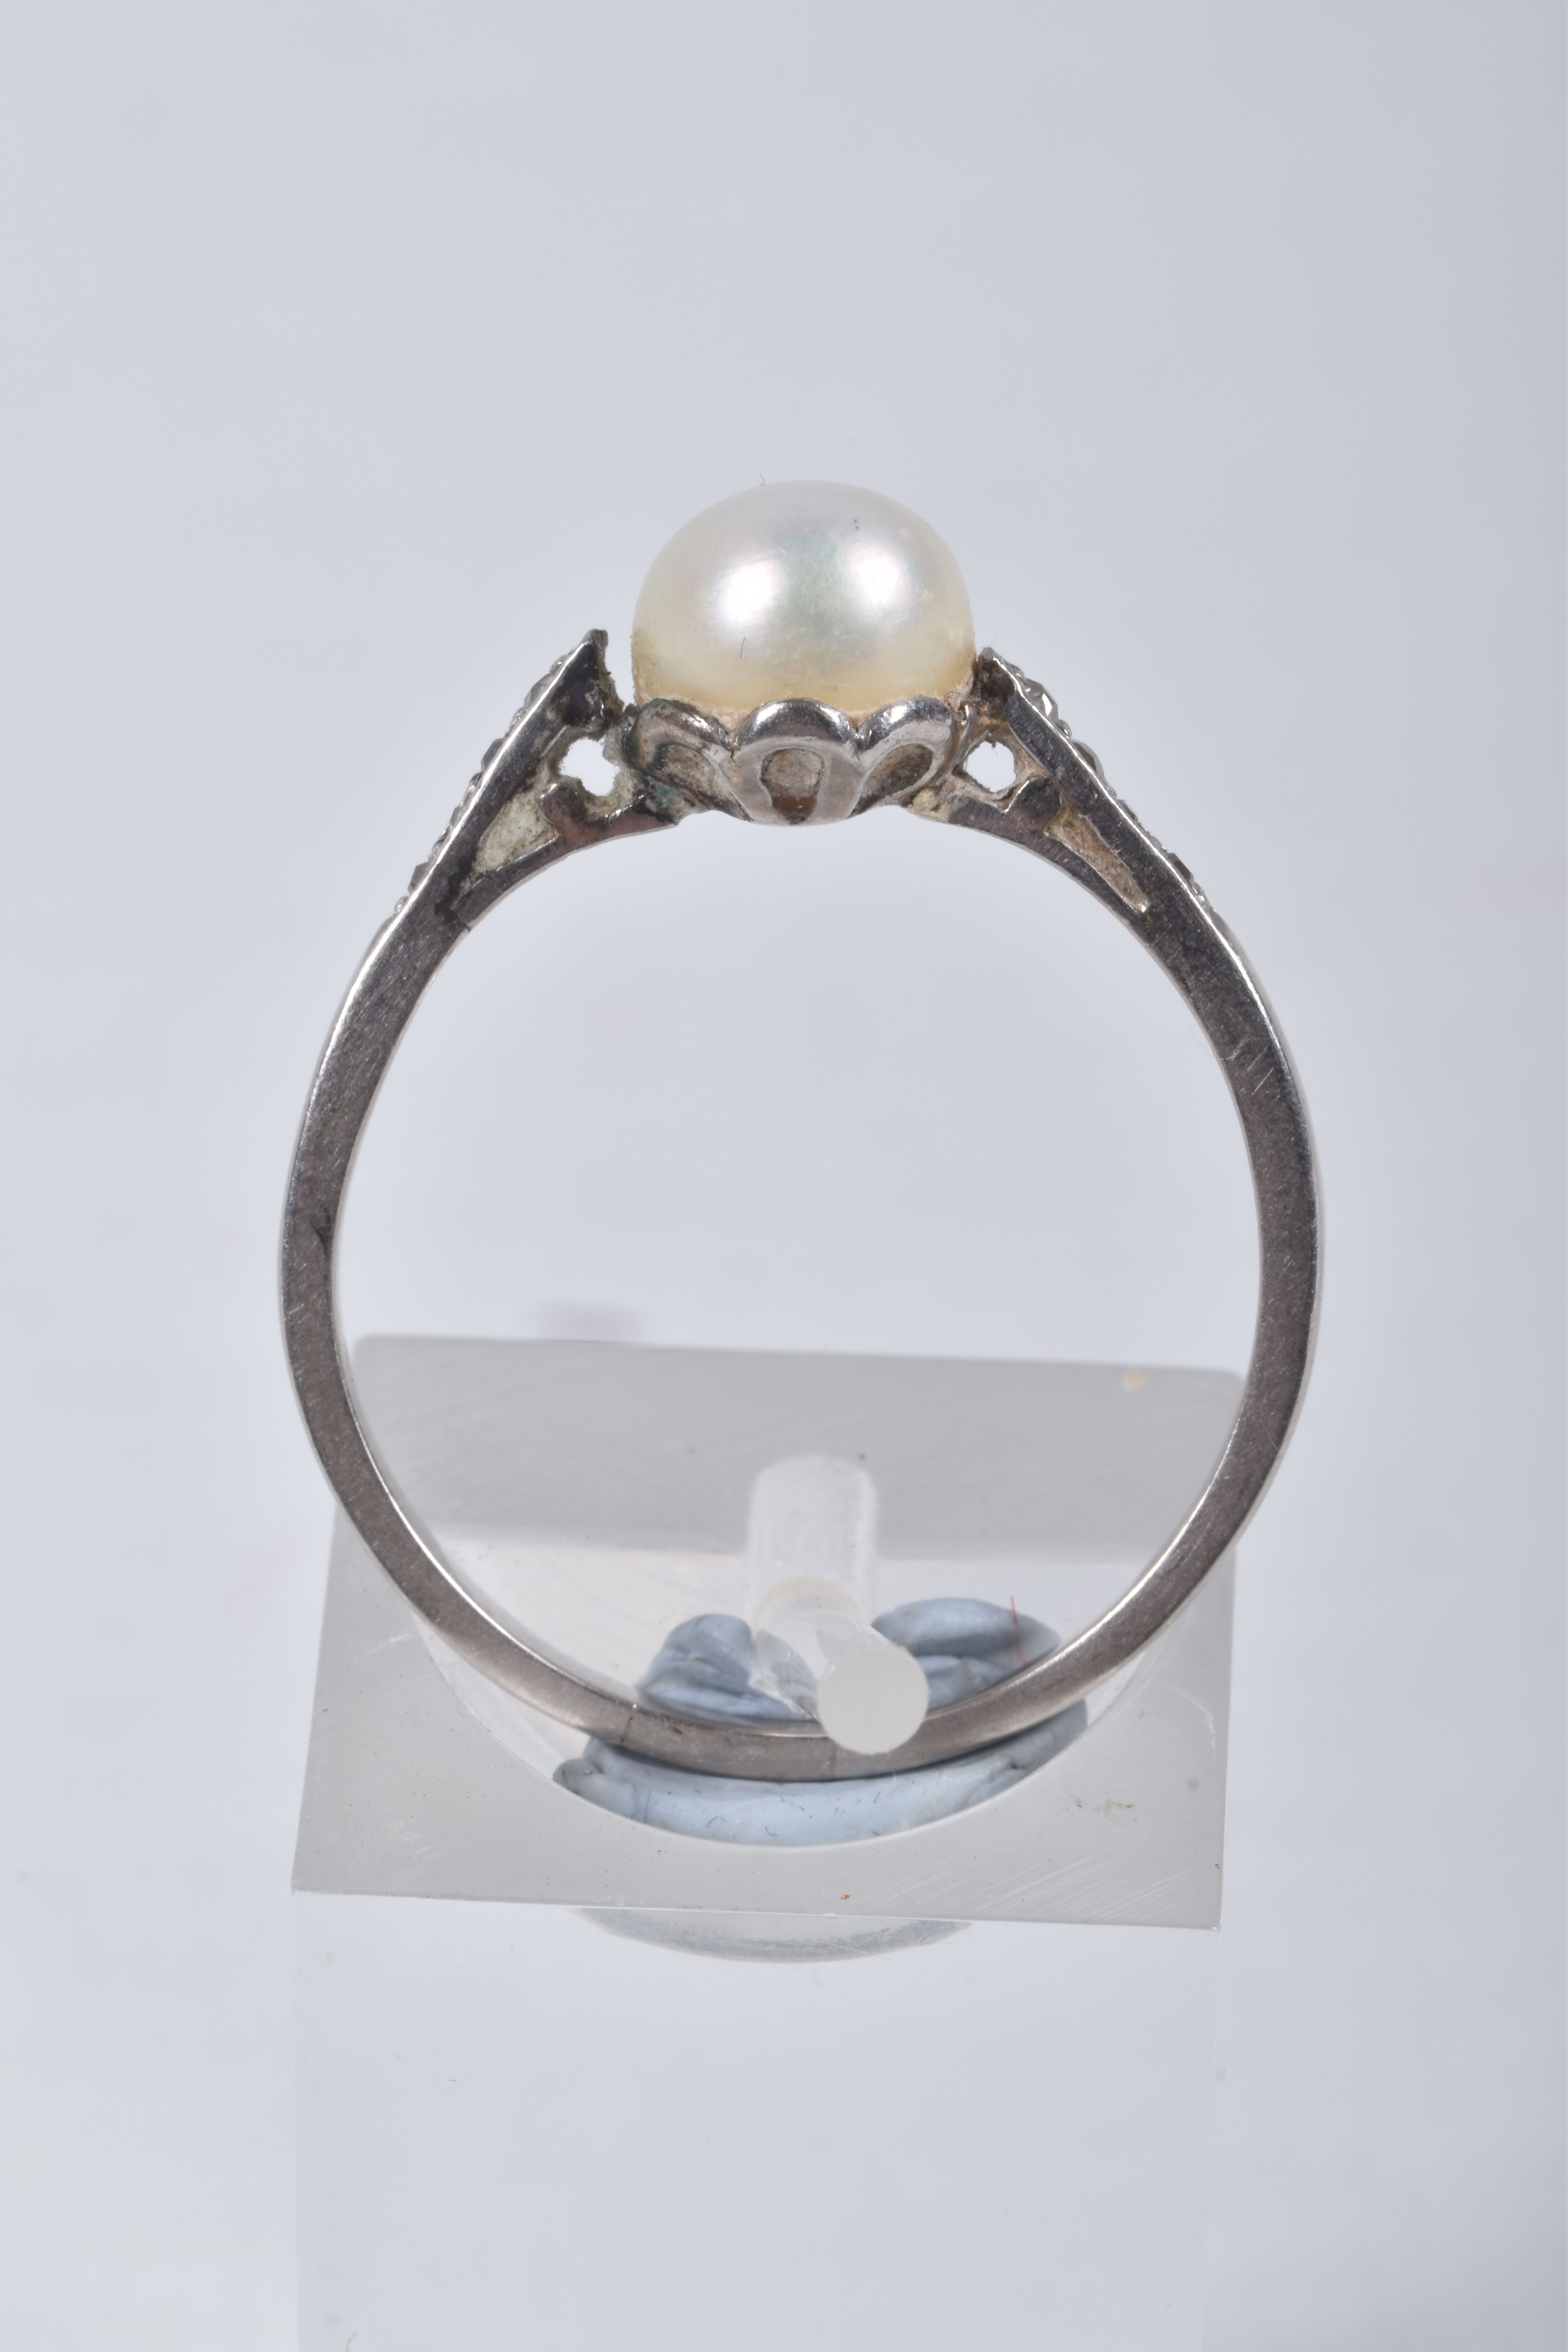 A CULTURED PEARL AND DIAMOND RING, set with a cultured pearl, measuring approximately 6.7mm, to - Image 3 of 3